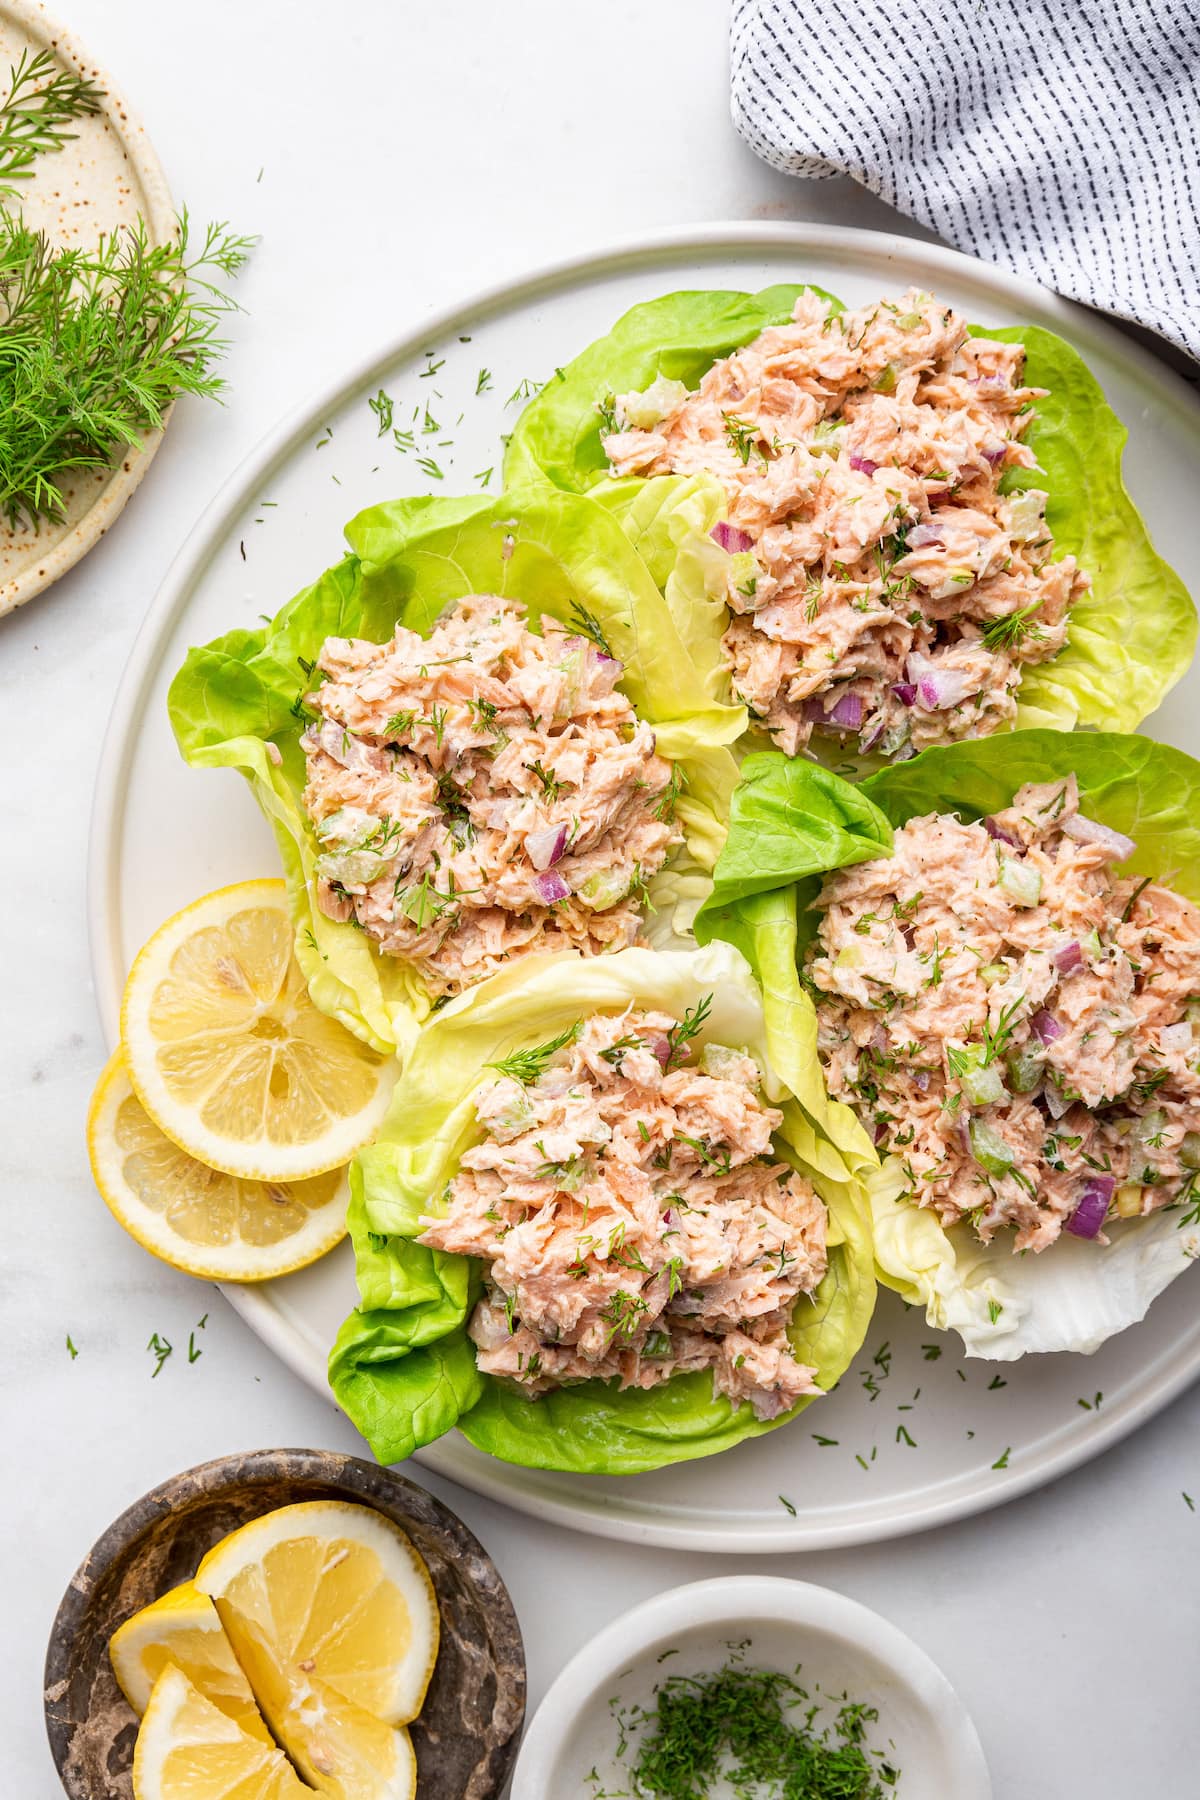 Four lettuce leaves containing salmon salad on a plate.